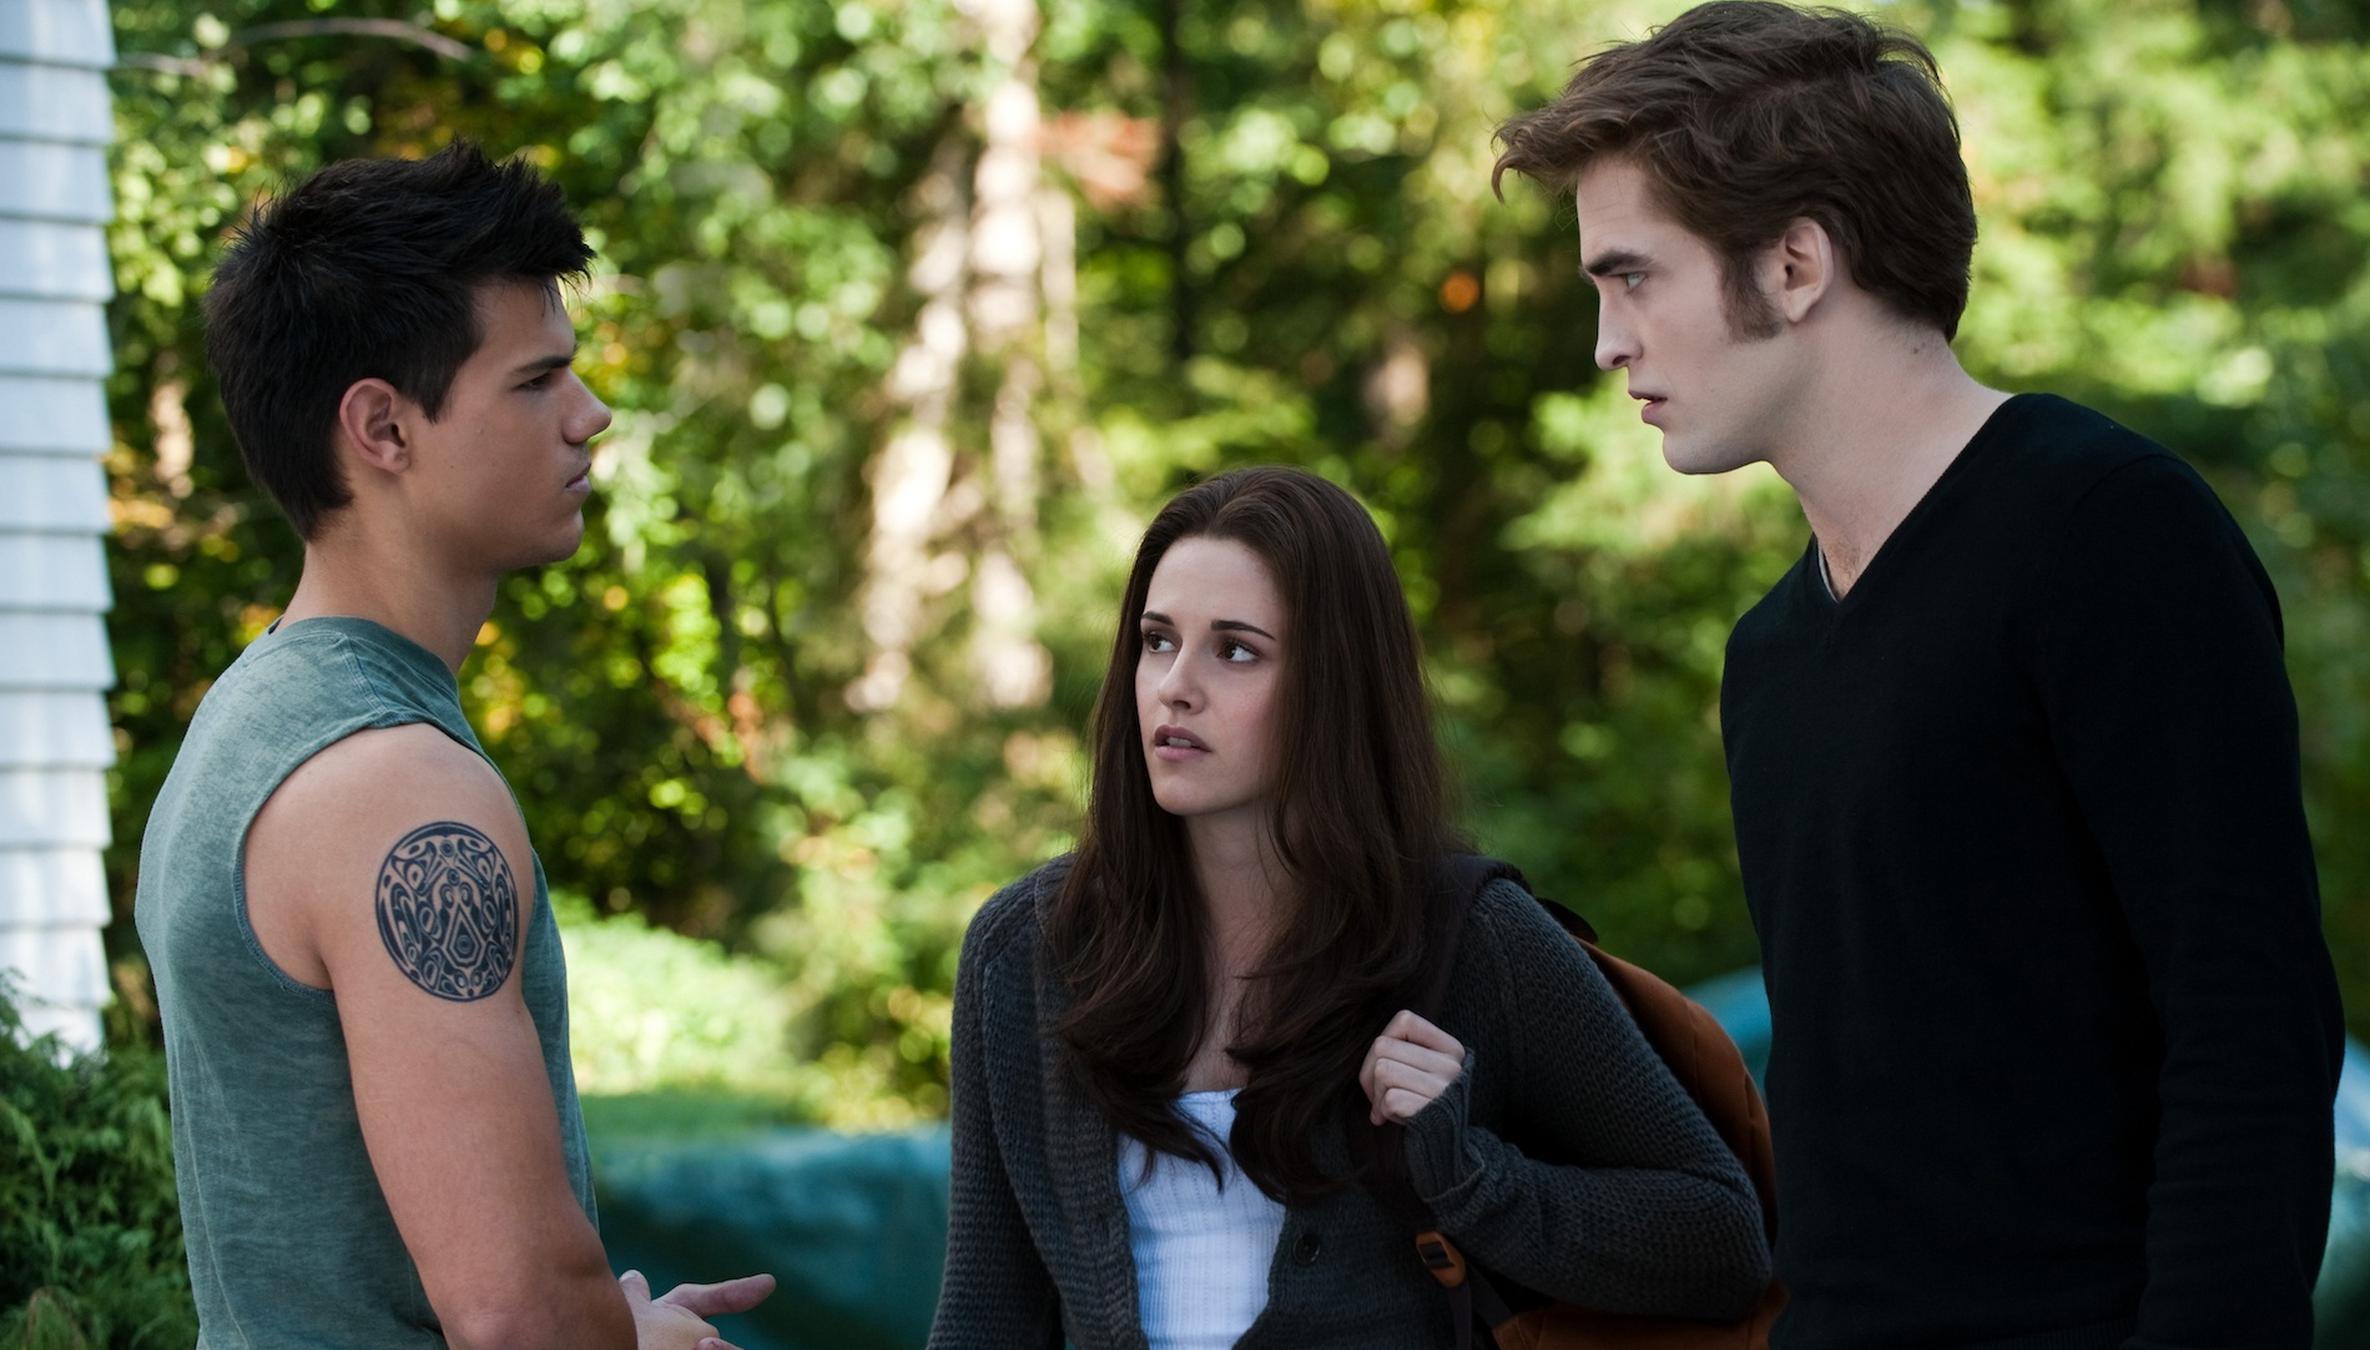 10 songs from the “Twilight” saga worth watching (part 2)